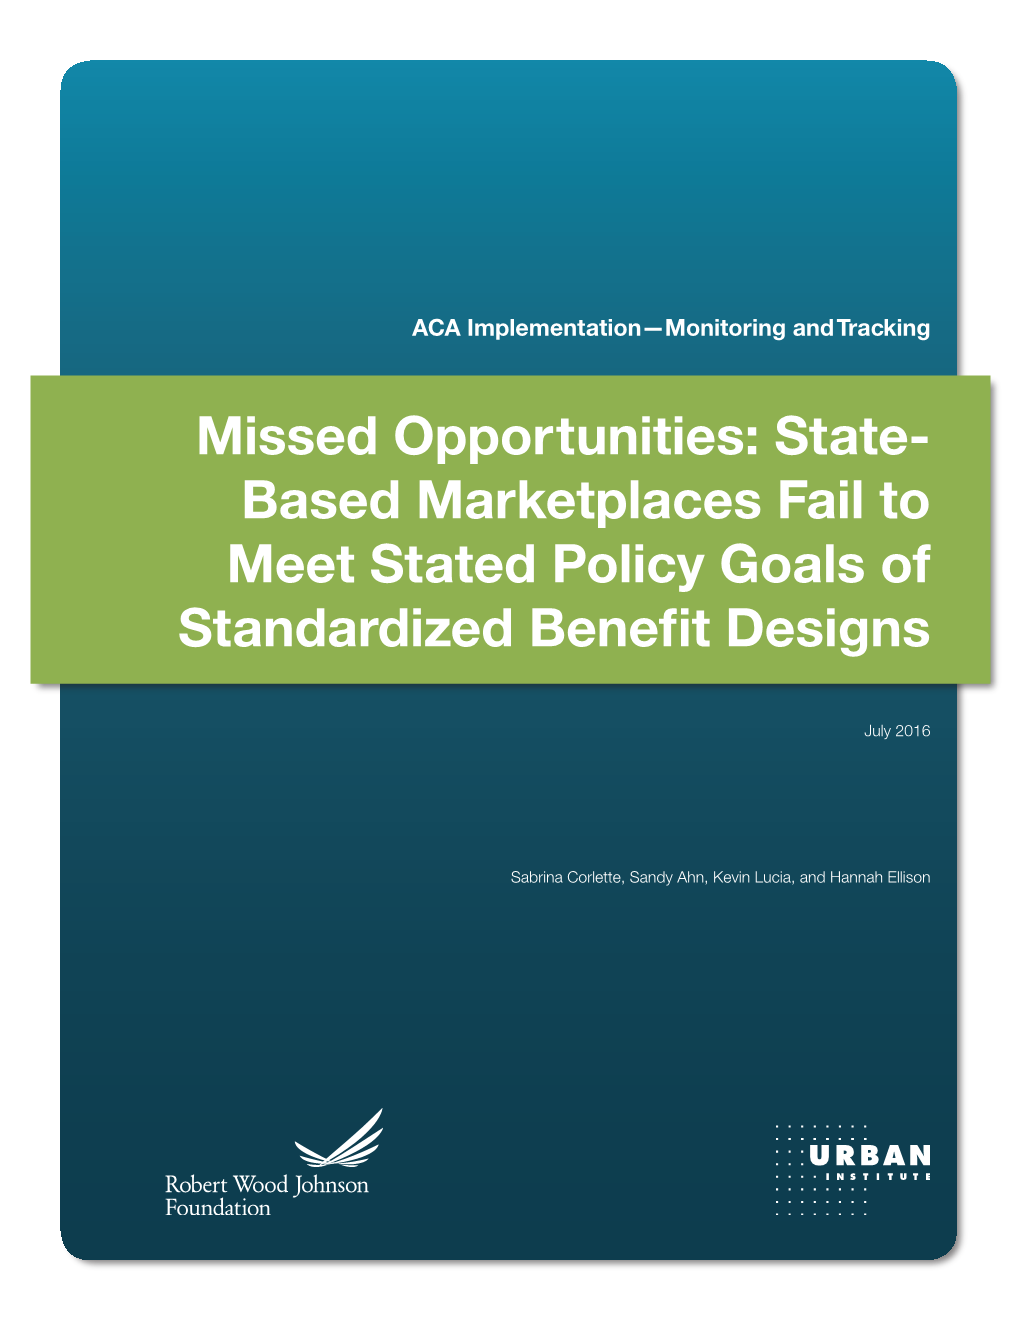 Based Marketplaces Fail to Meet Stated Policy Goals of Standardized Benefit Designs